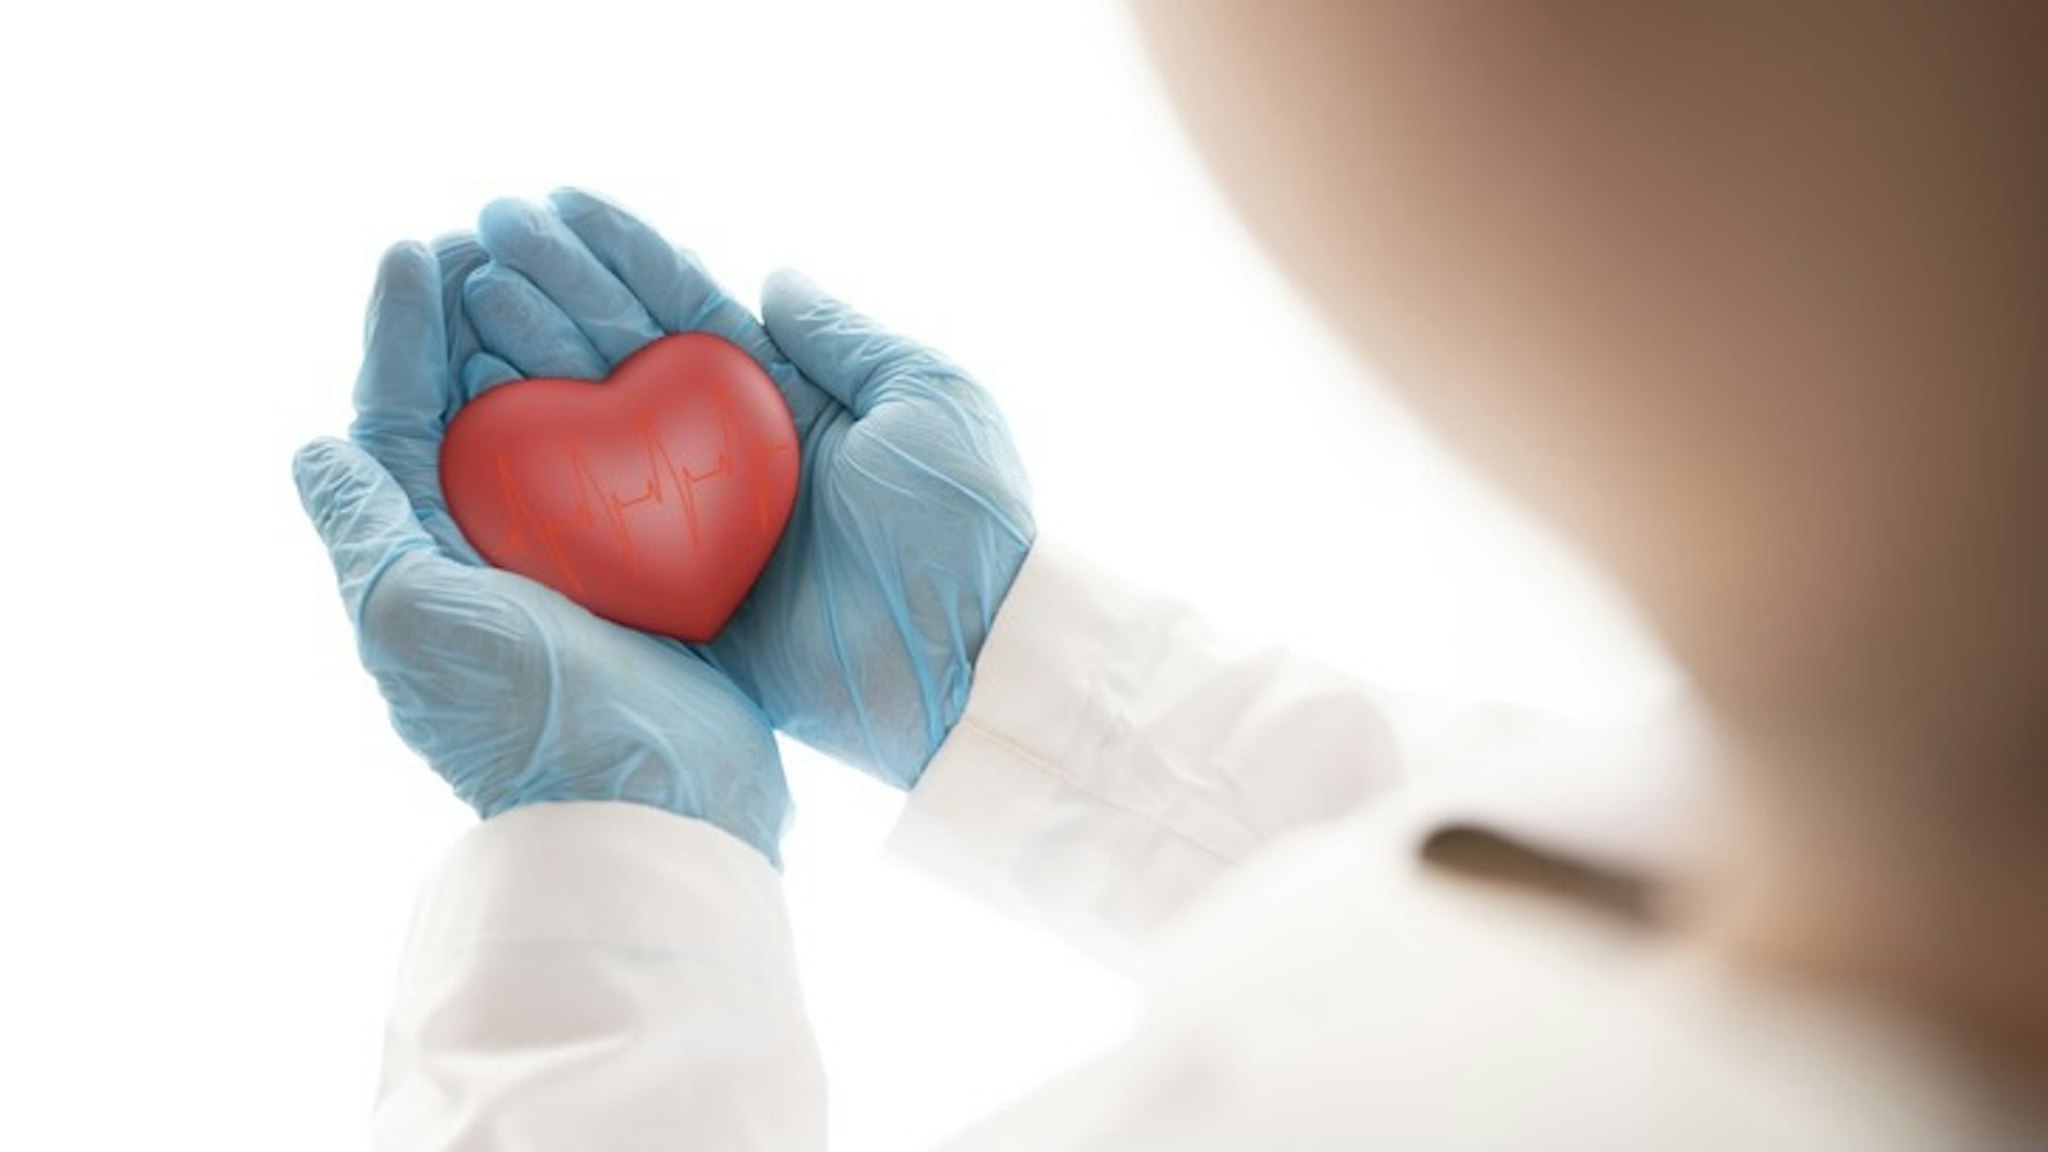 Heart Shape with doctor - stock photo Heart Shape with doctor isayildiz via Getty Images